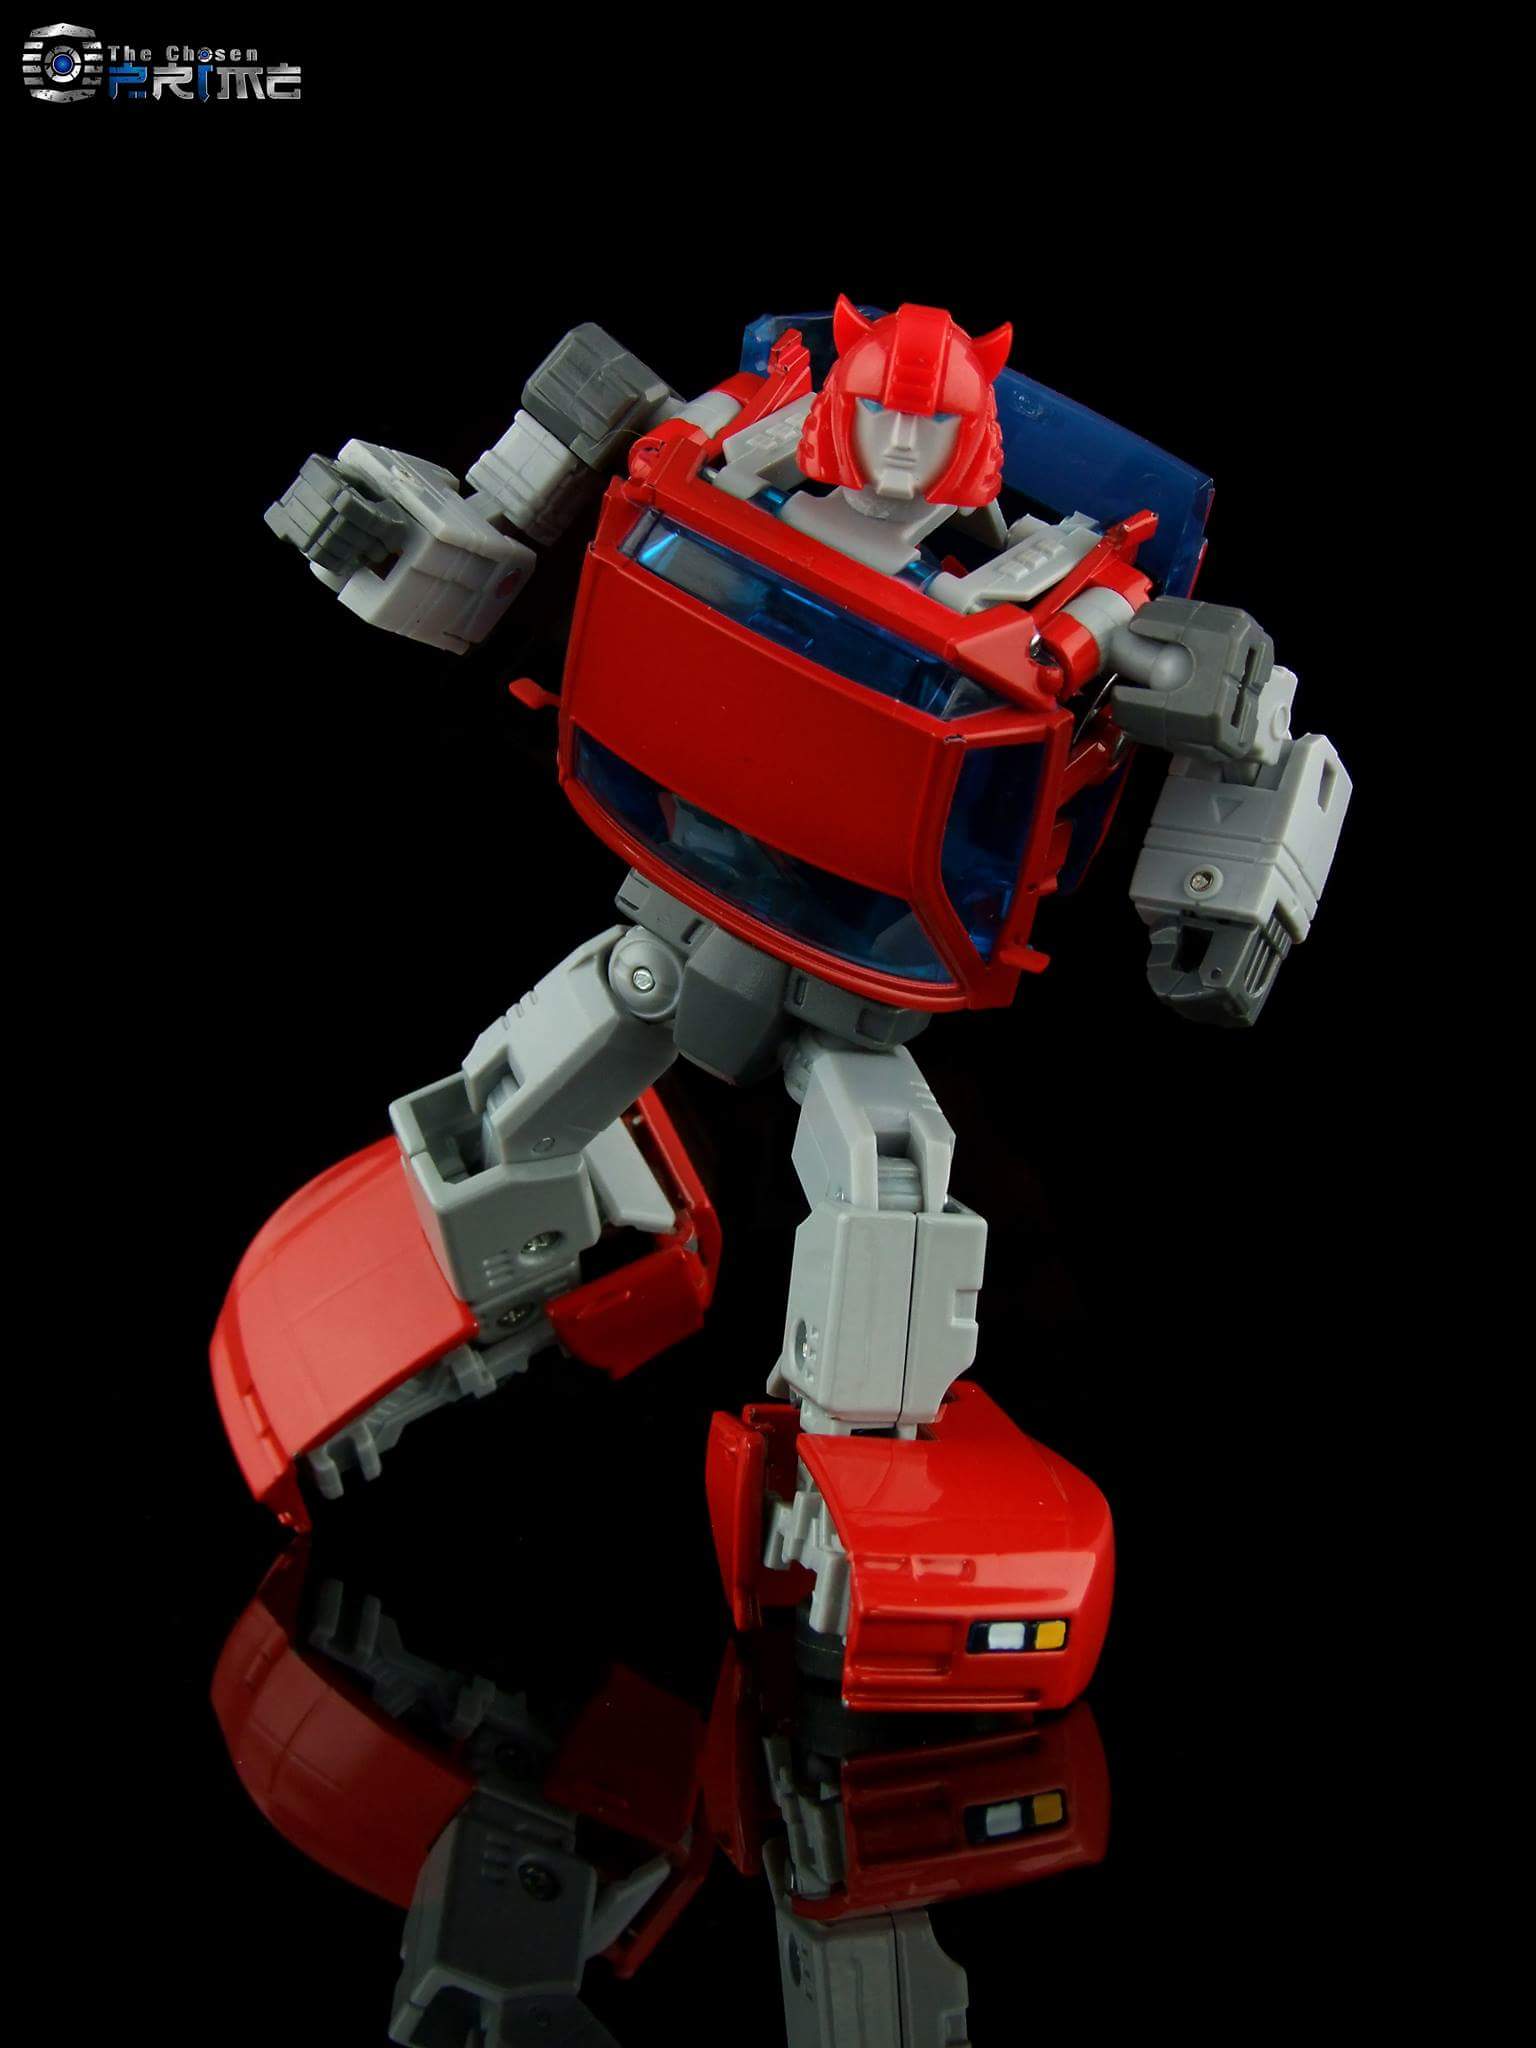 [ACE Collectables] Produit Tiers - Minibots MP - ACE-01 Tumbler (aka Cliffjumper/Matamore), ACE-02 Hiccups (aka Hubcap/Virevolto), ACE-03 Trident (aka Seaspray/Embruns) AfTtwGwi